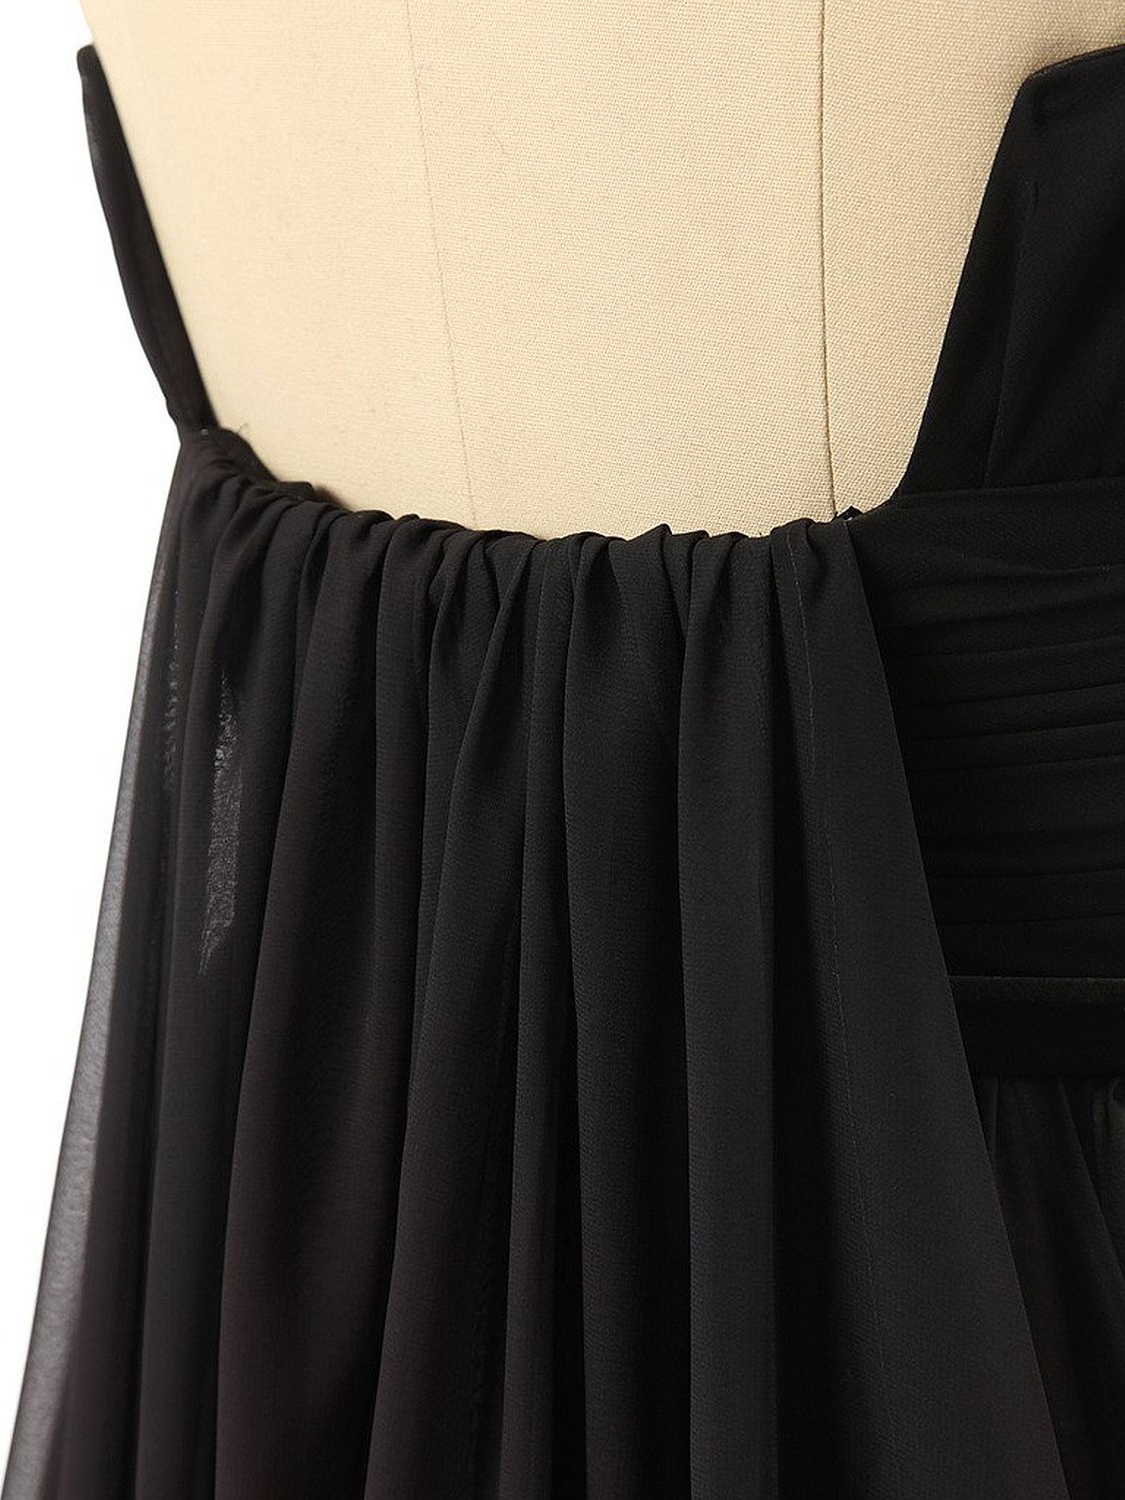 Ericdress Strapless Pleats Fading Color Evening Dress